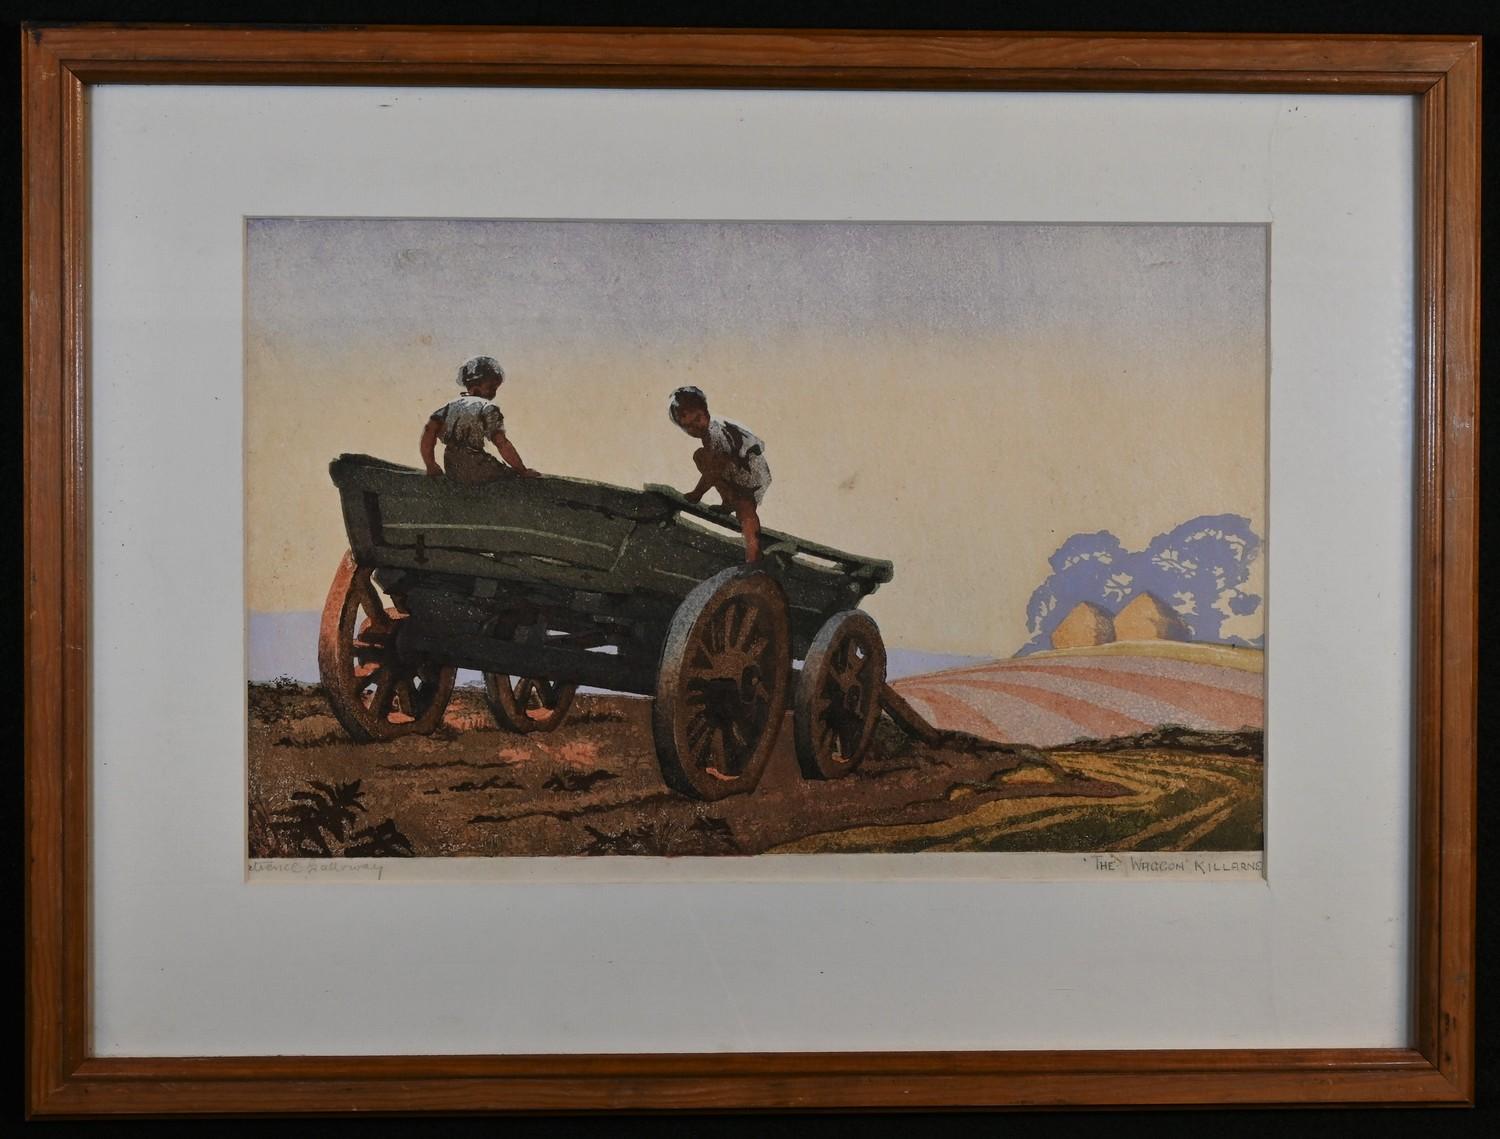 Patience Galloway, by and after, , Killarney, The Waggon, a colour print, signed in pencil, 23cm x